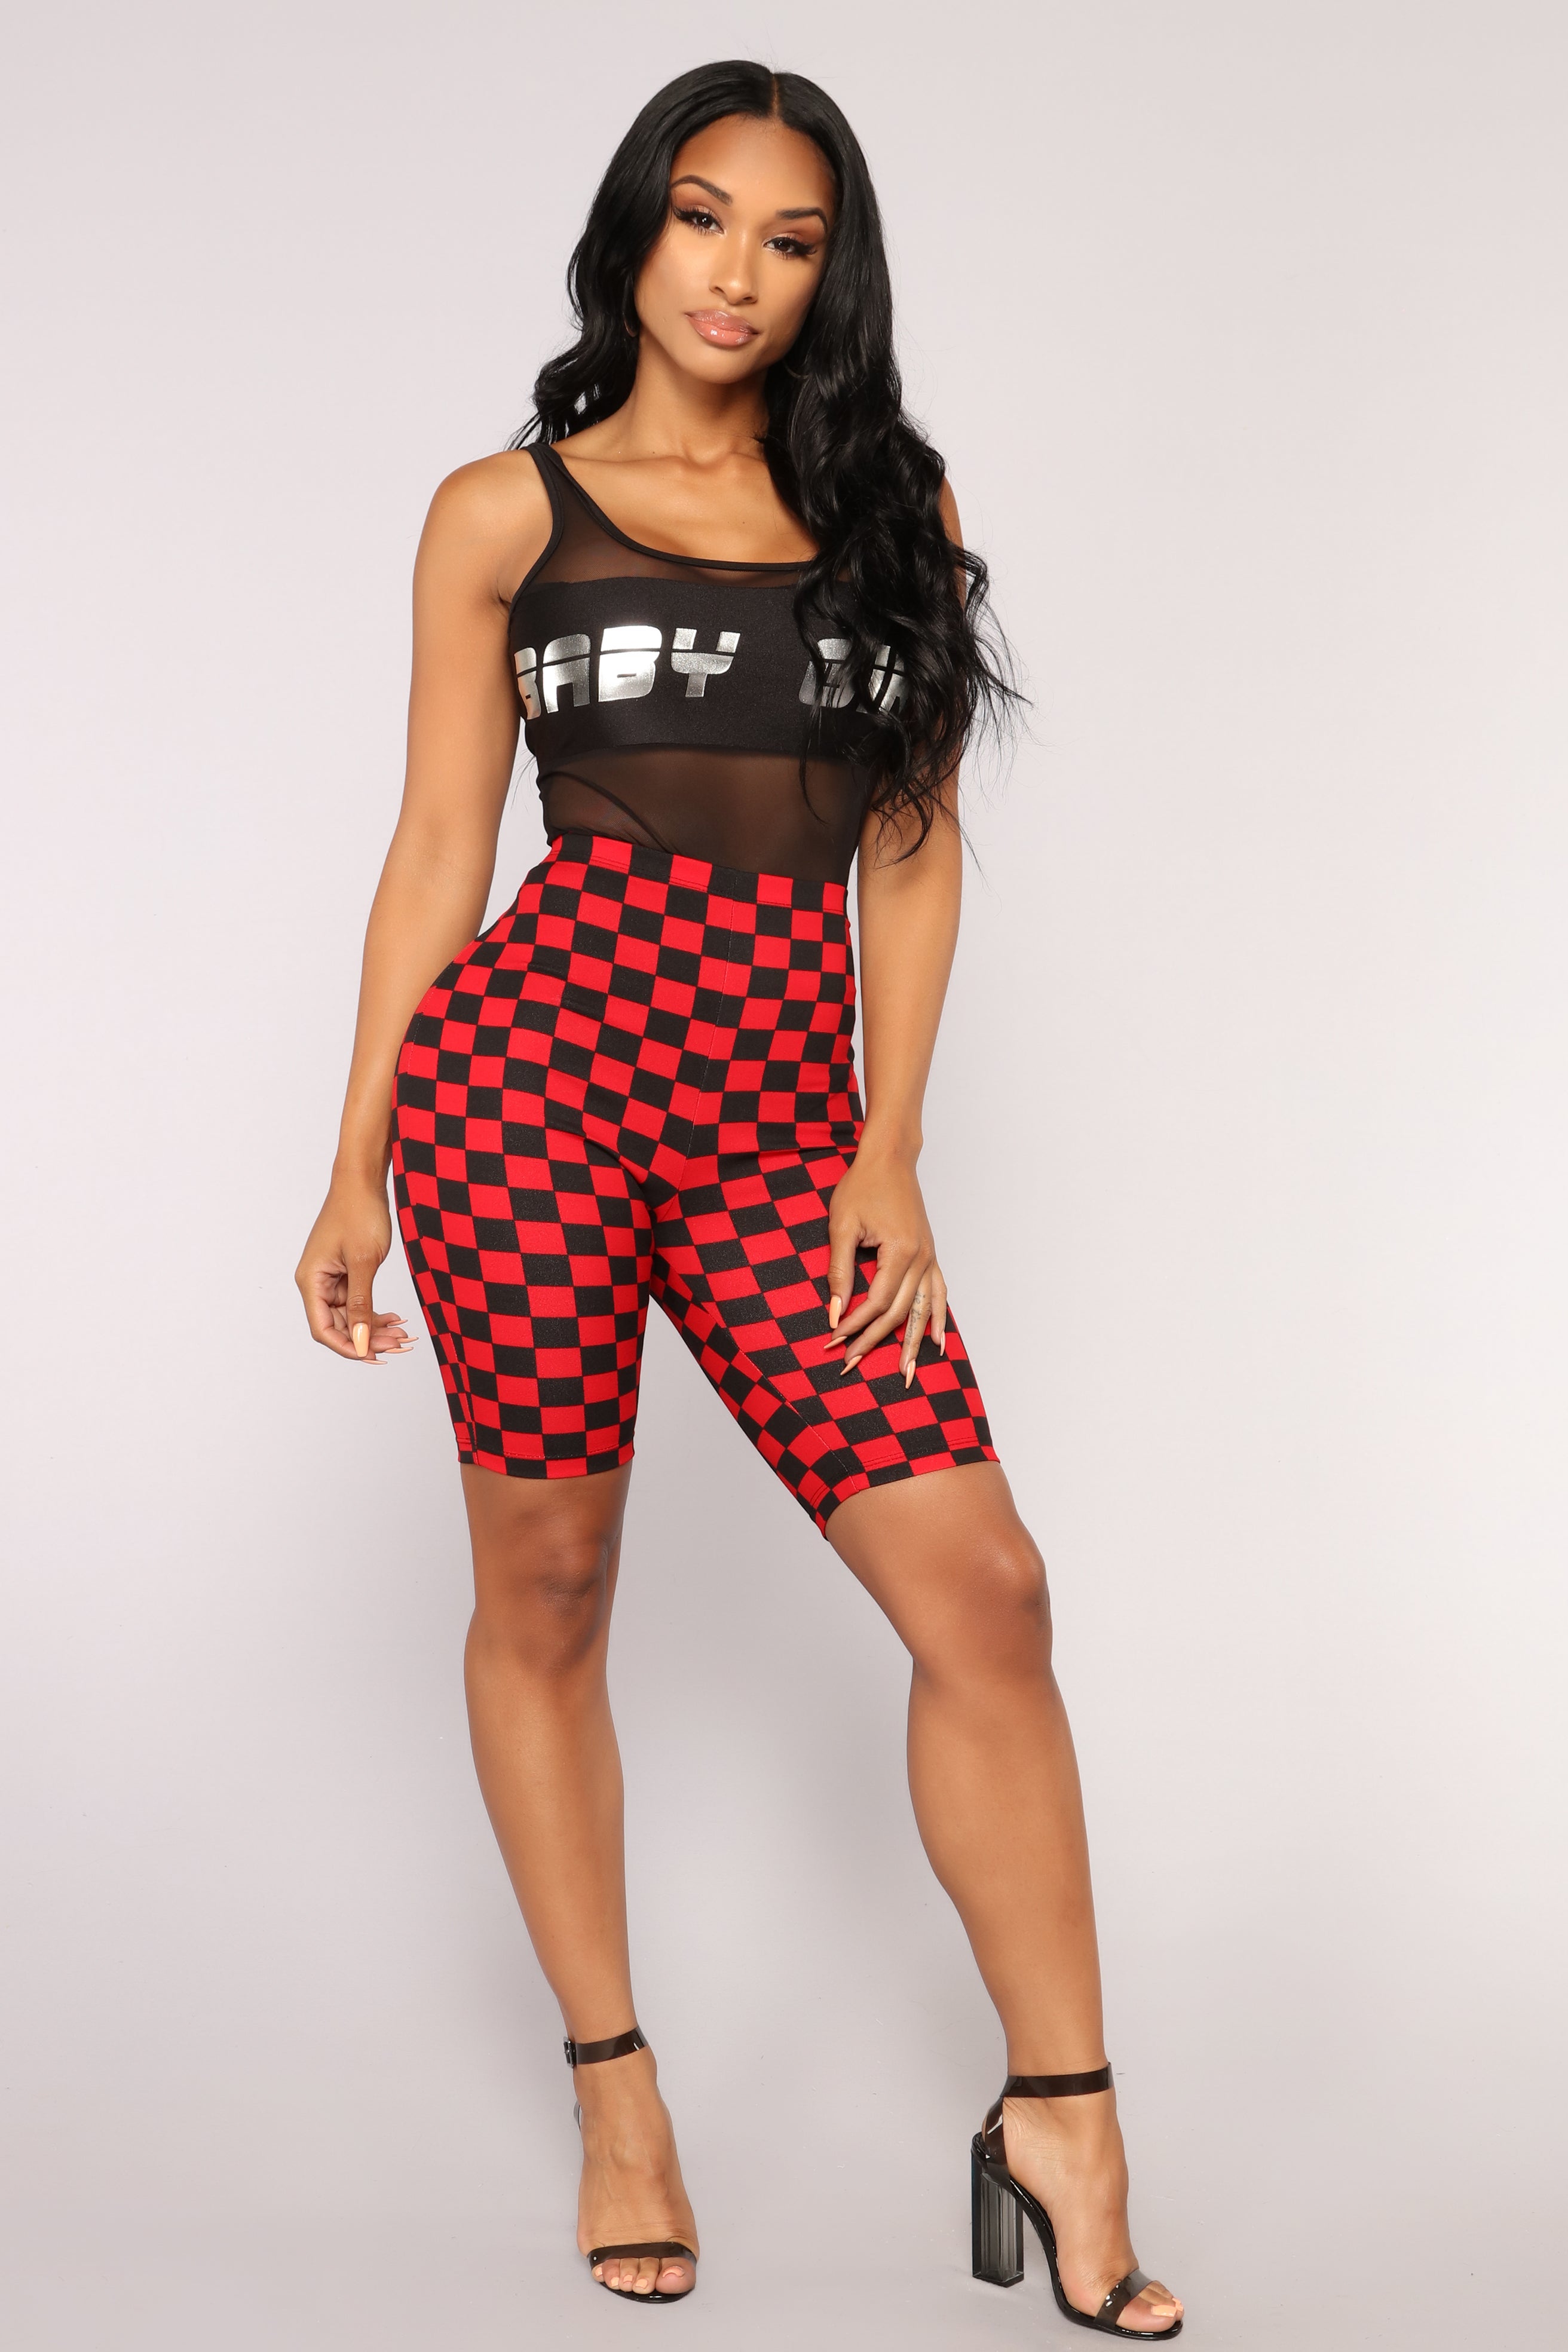 red and black biker shorts